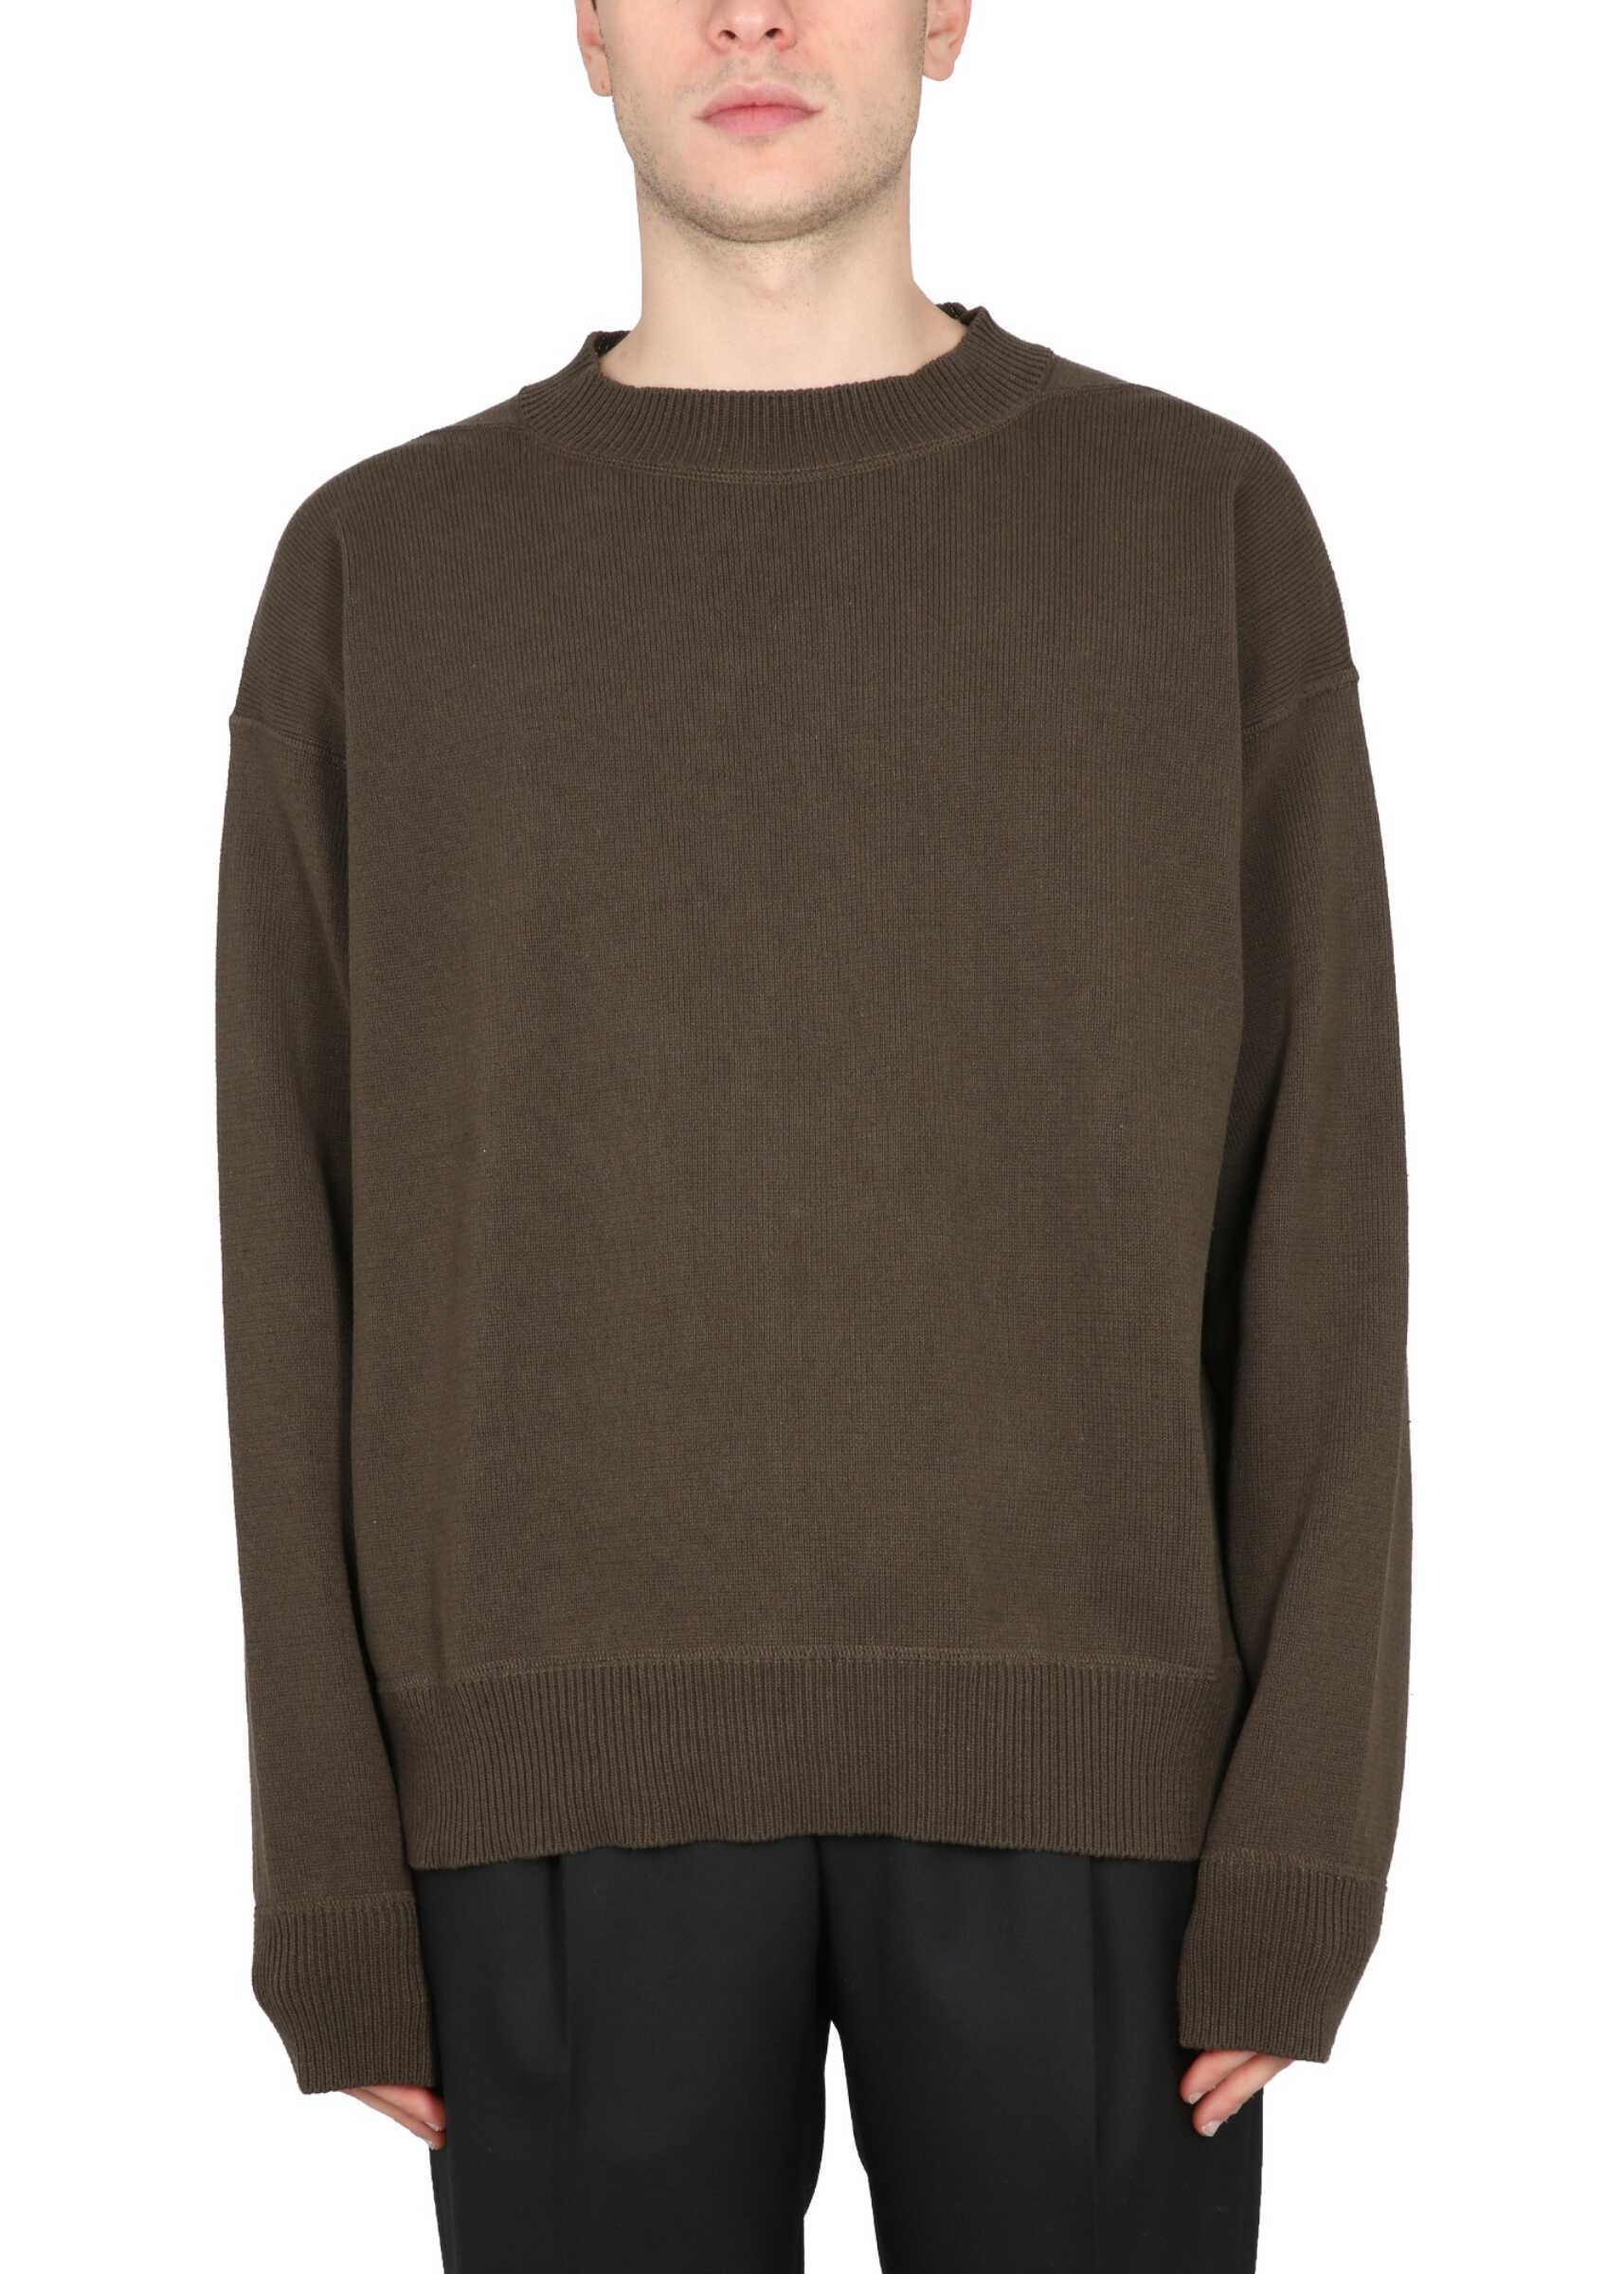 Margaret Howell Wool Jersey. MILITARY GREEN